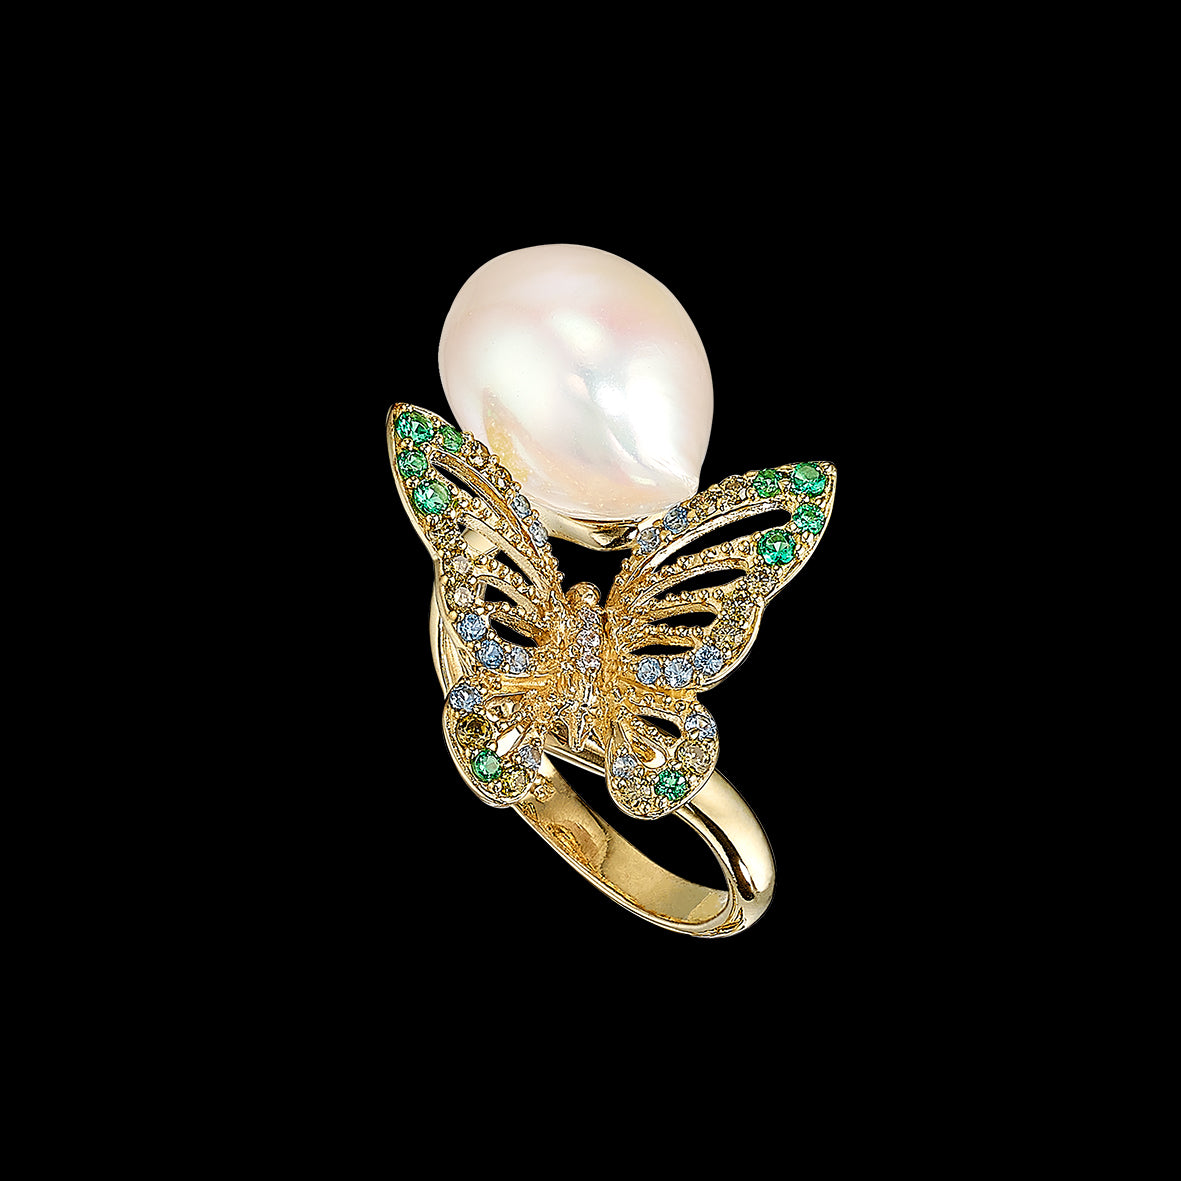 Gold Butterfly Pearl Ring, Ring, Anabela Chan Joaillerie - Fine jewelry with laboratory grown and created gemstones hand-crafted in the United Kingdom. Anabela Chan Joaillerie is the first fine jewellery brand in the world to champion laboratory-grown and created gemstones with high jewellery design, artisanal craftsmanship and a focus on ethical and sustainable innovations.